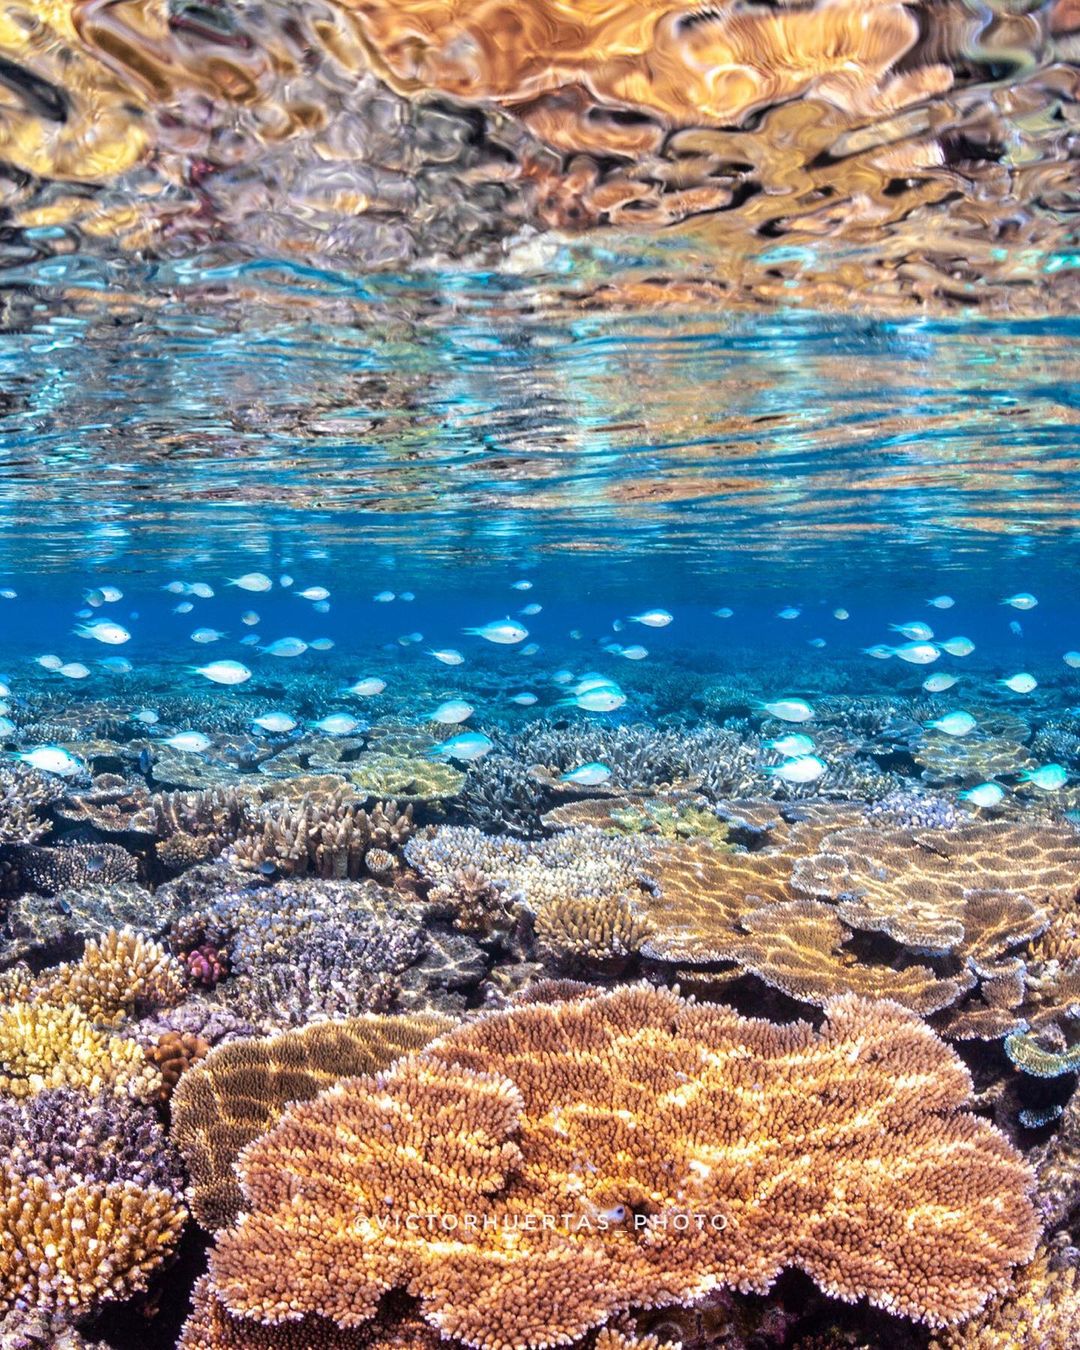 An adventurous guide to the Great Barrier Reef